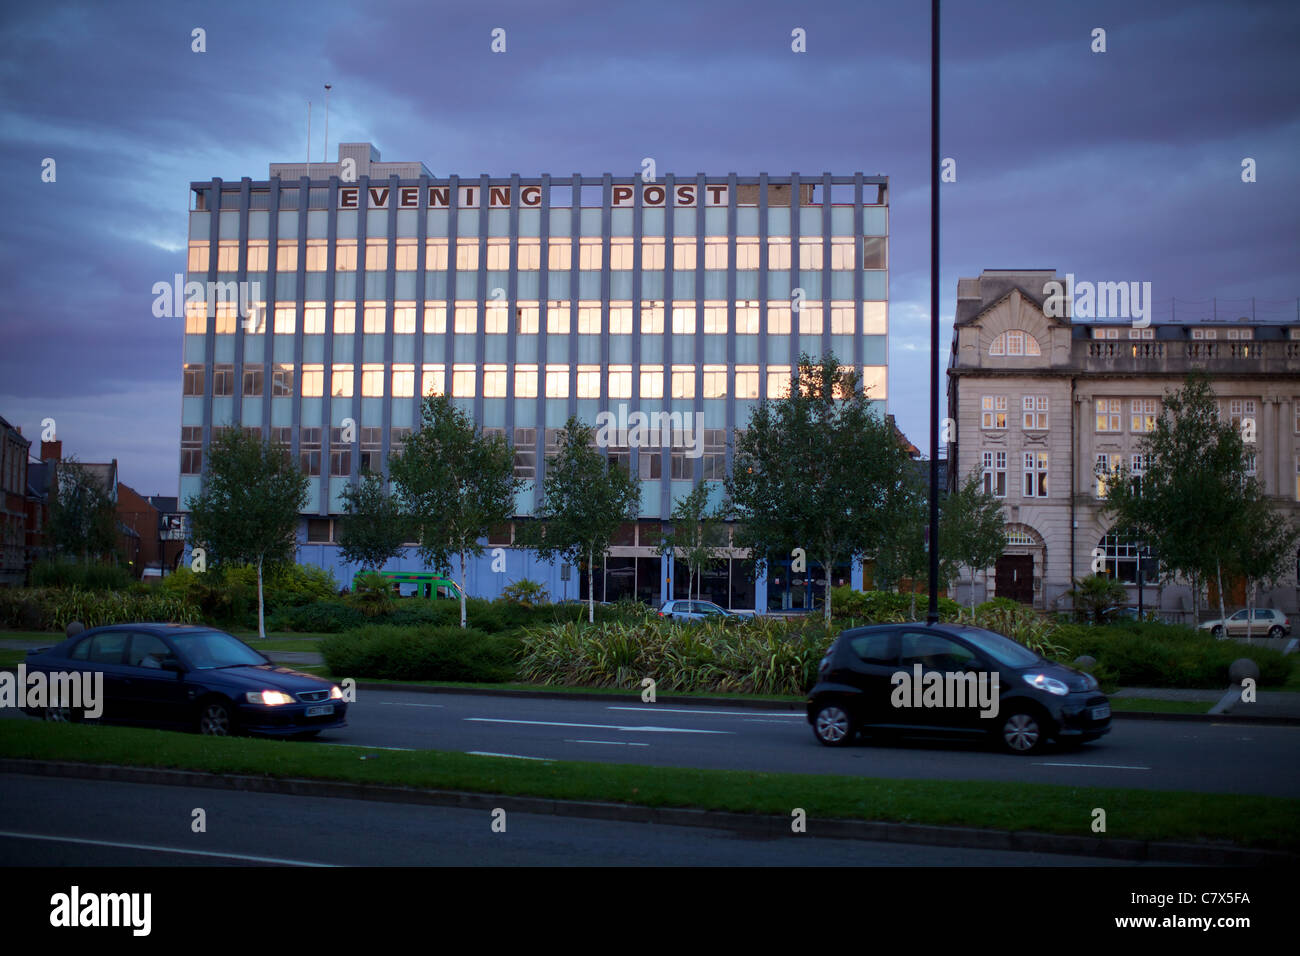 The South Wales Evening Post building in Swasea at dusk Stock Photo